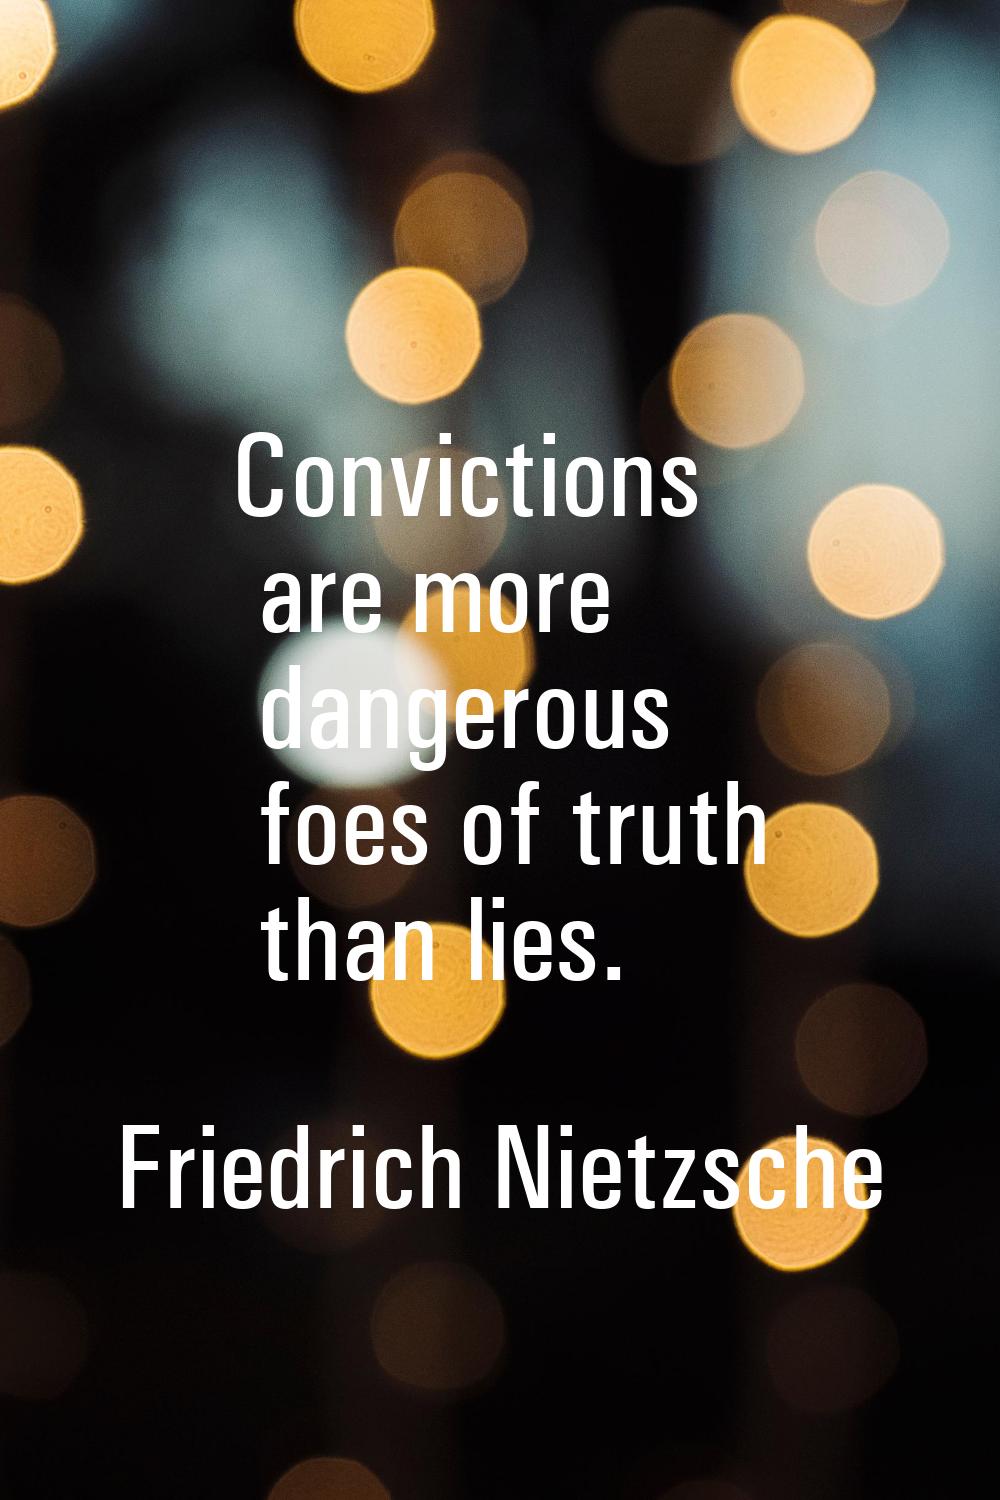 Convictions are more dangerous foes of truth than lies.